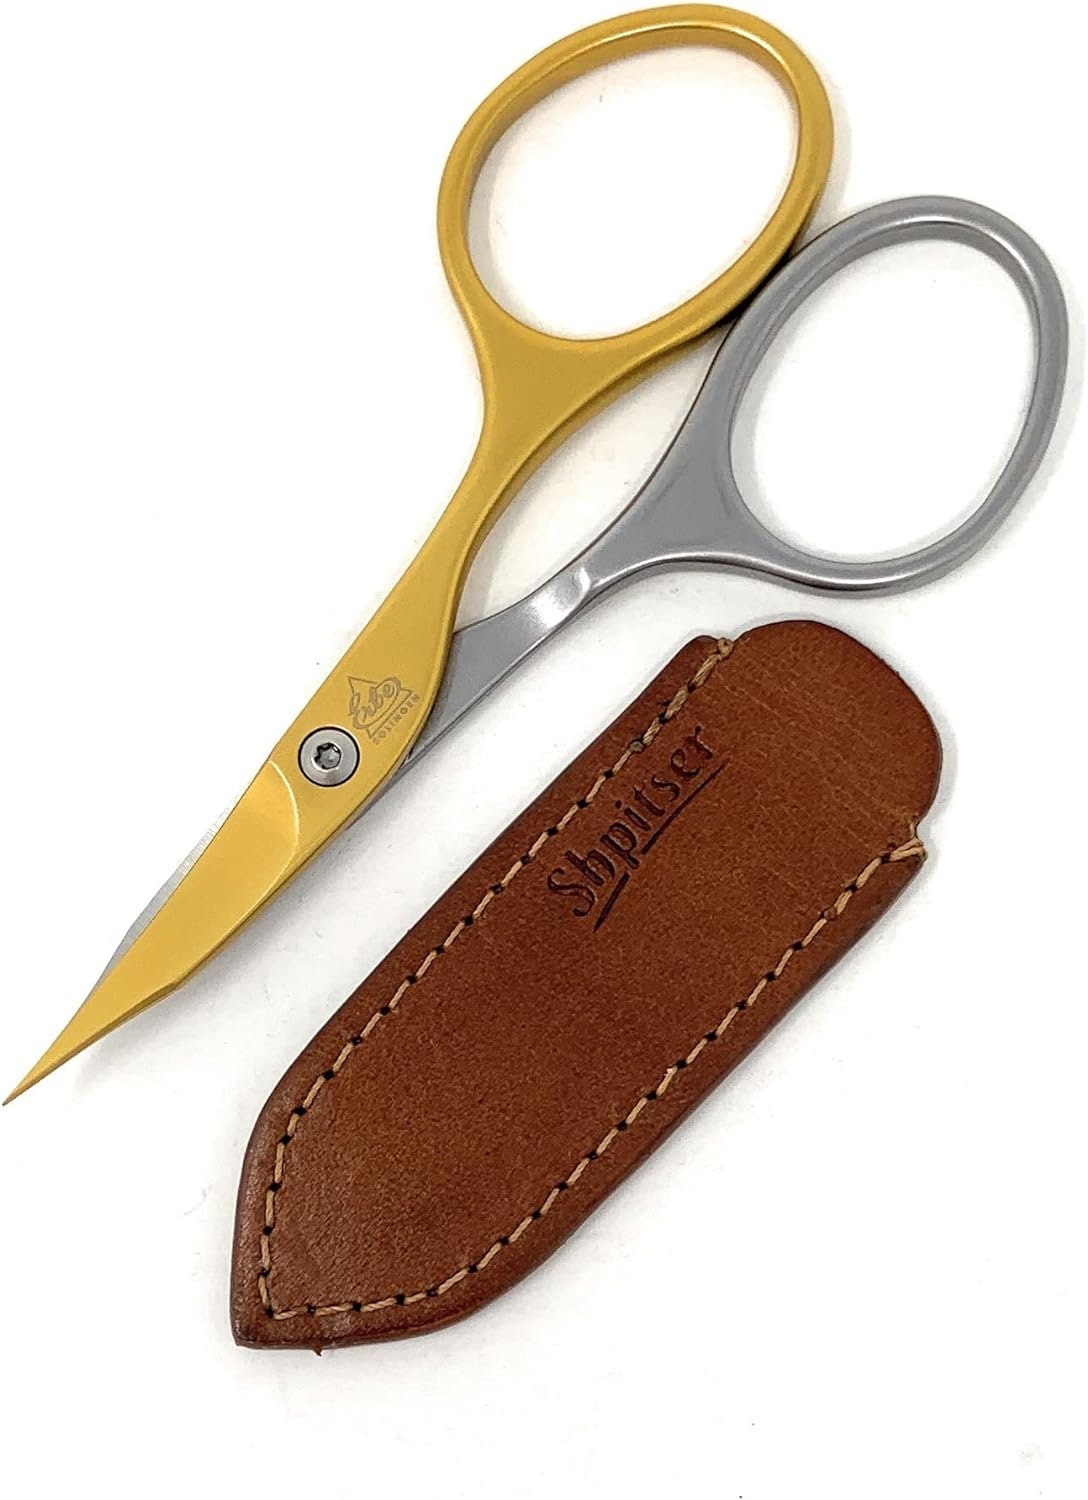 Cuticle Scissors - Made in Germany ✶ European Nail Shop